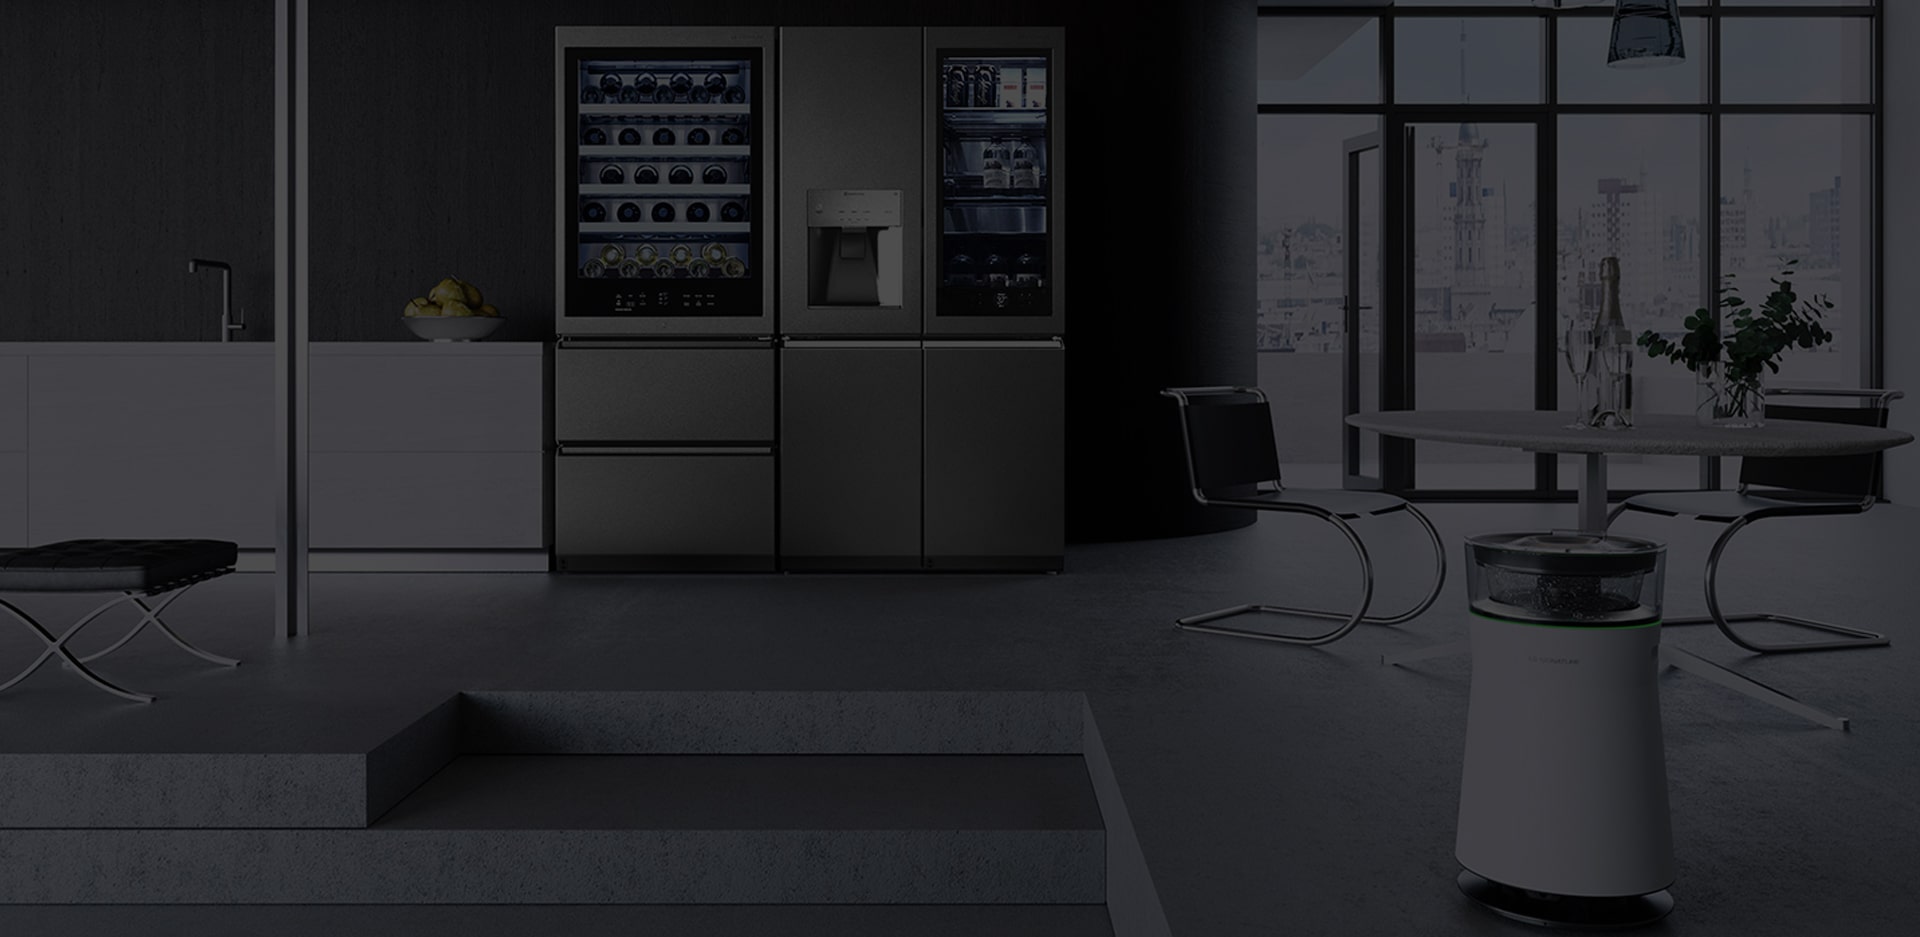 LG SIGNATURE Refrigerator and Wine Cellar are placed in the Bauhaus style of modern kitchen with a backdrop of Berlin.